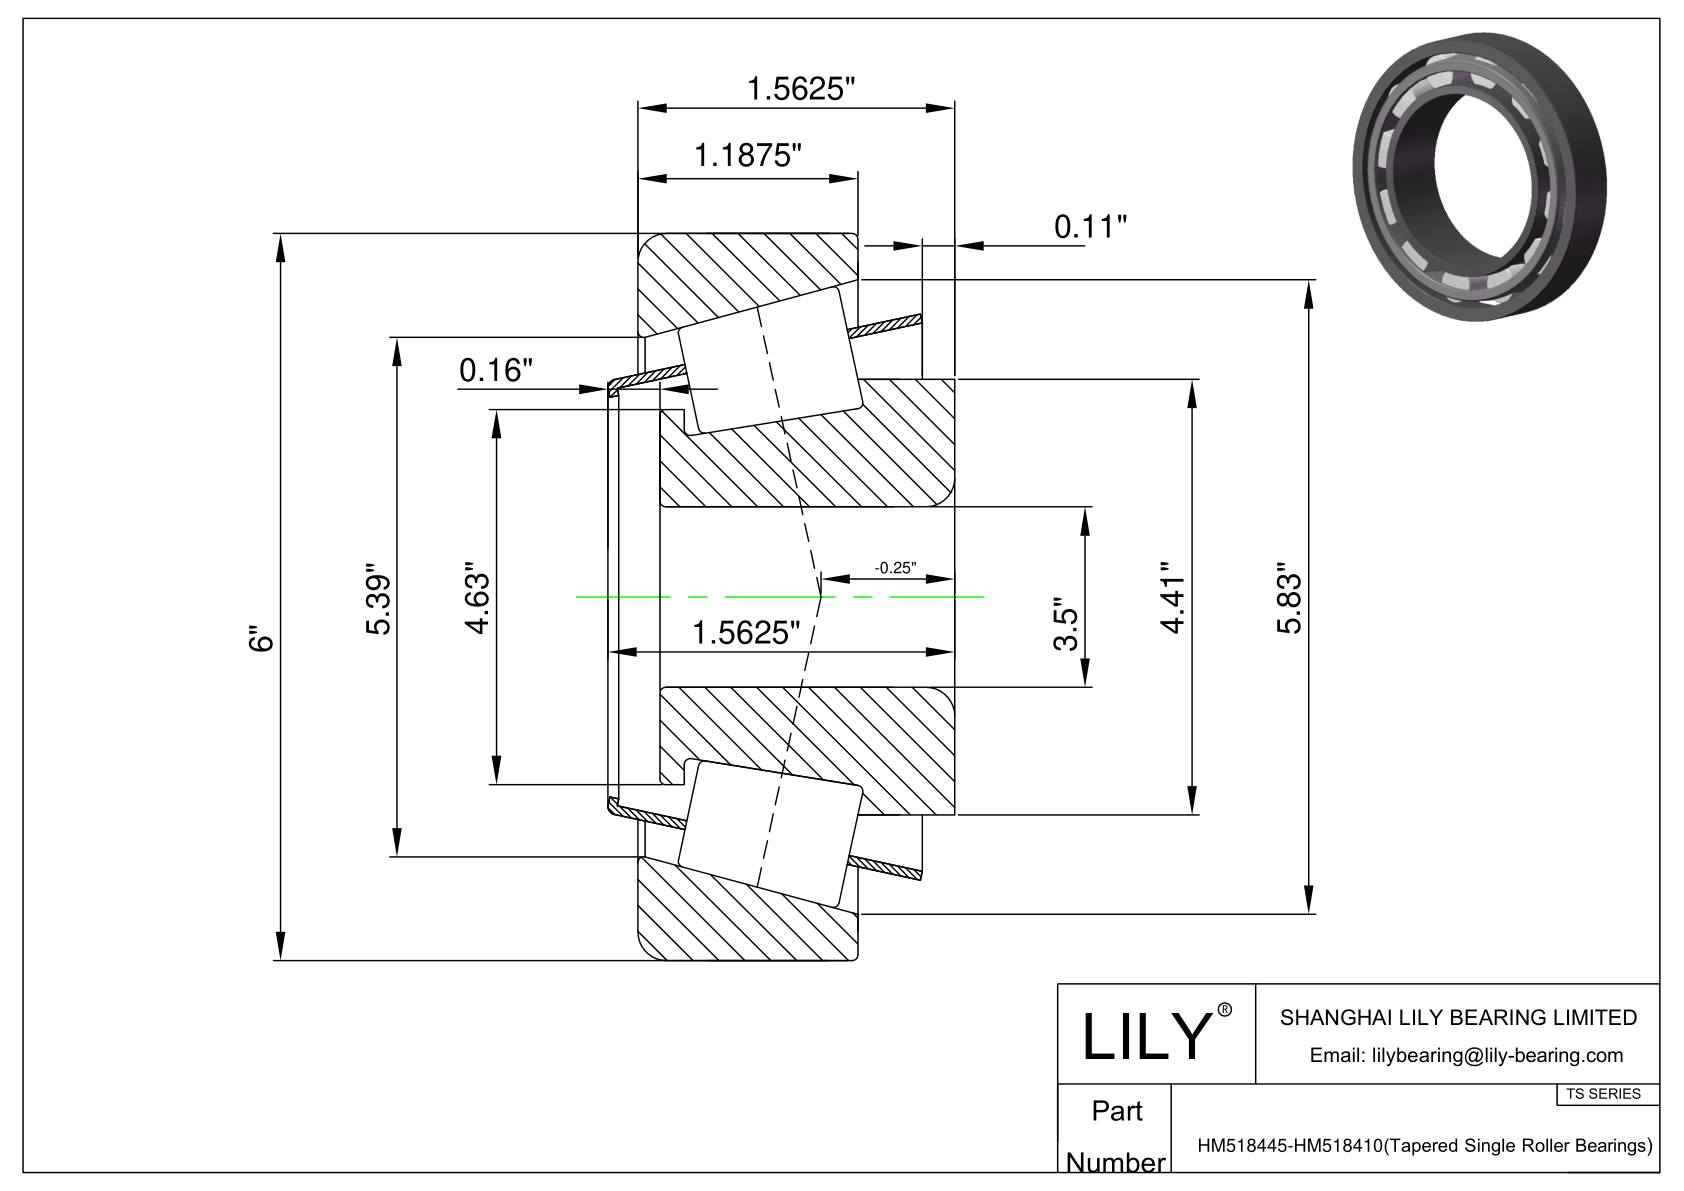 HM518445-HM518410 TS (Tapered Single Roller Bearings) (Imperial) cad drawing